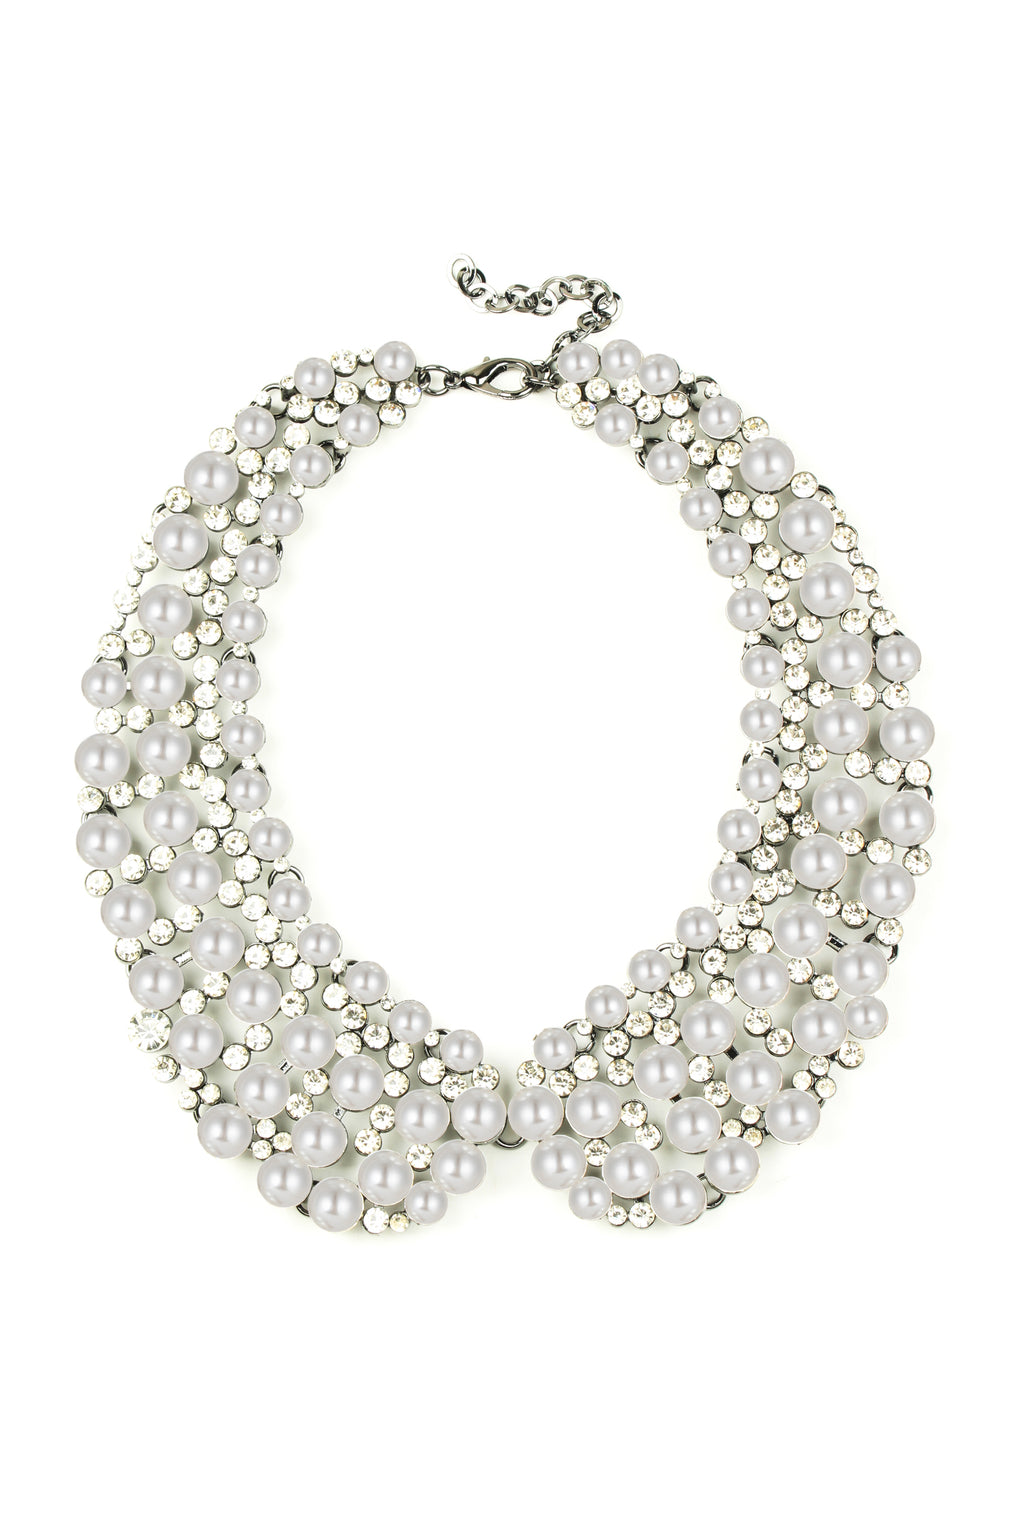 Glass crystal collar statement necklace.